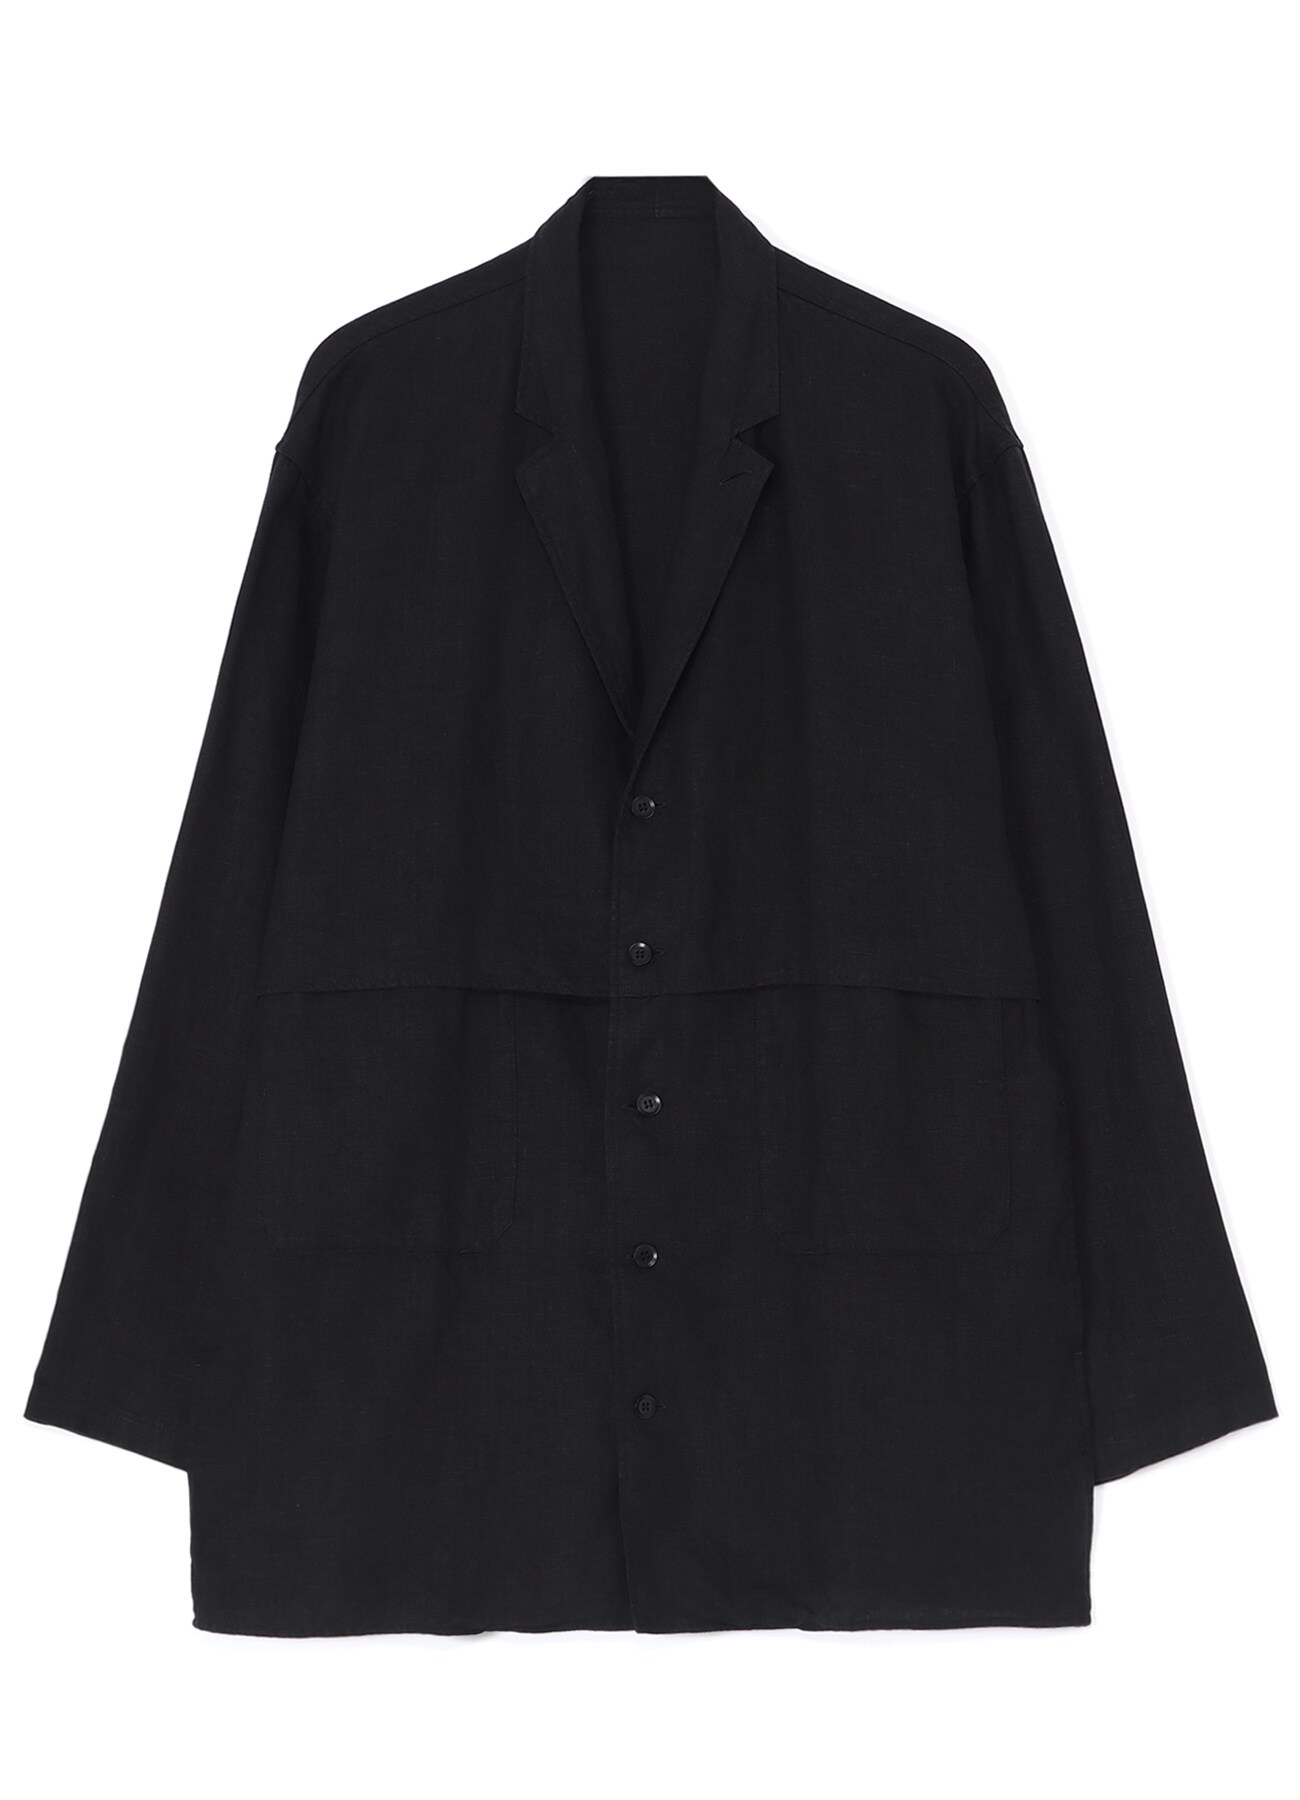 SHIRT WITH NOTCHED LAPELS